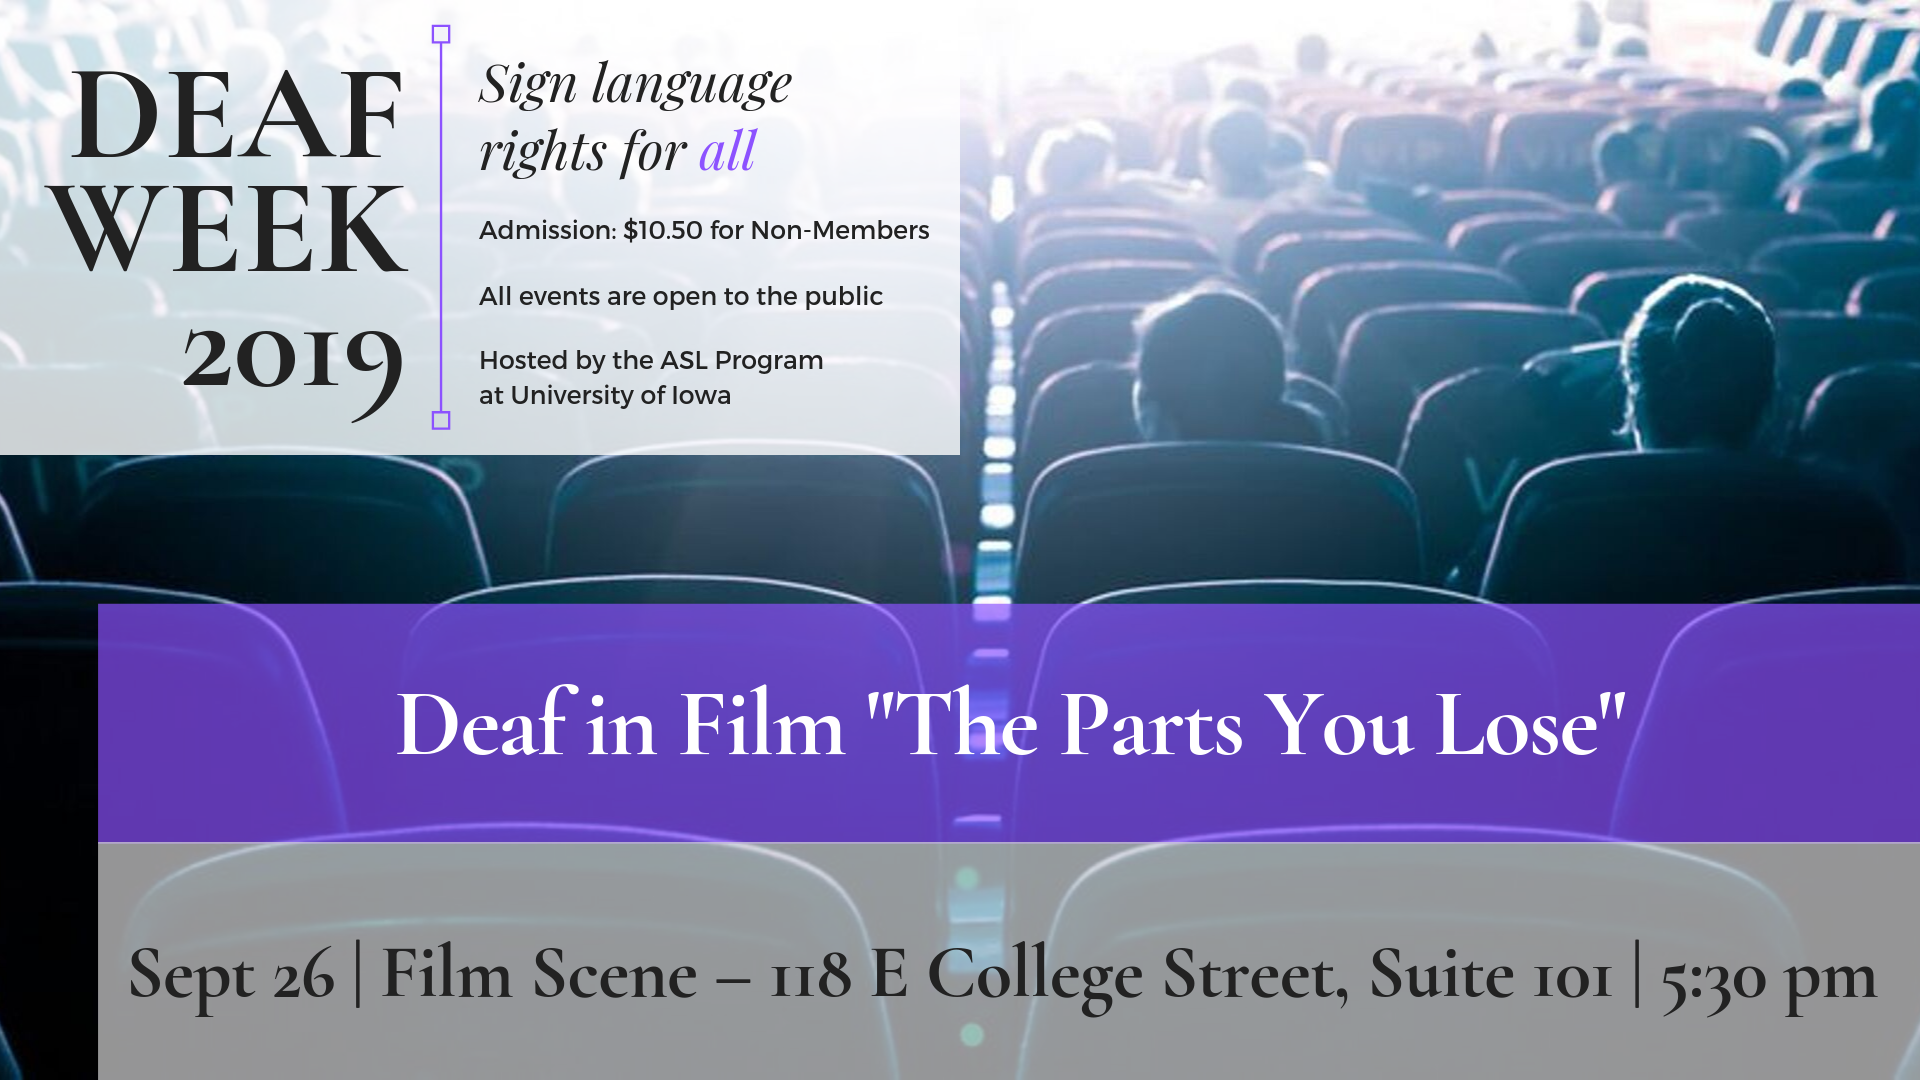 Deaf in Film "The Parts You Lose" September 26 in Film Scene 118E College St Suite 101 at 5:30pm Deaf Week 2019 Sign language rights for all Admission is $10.50 for non-members All events are open to the public Hosted by the ASL Department at the University of Iowa